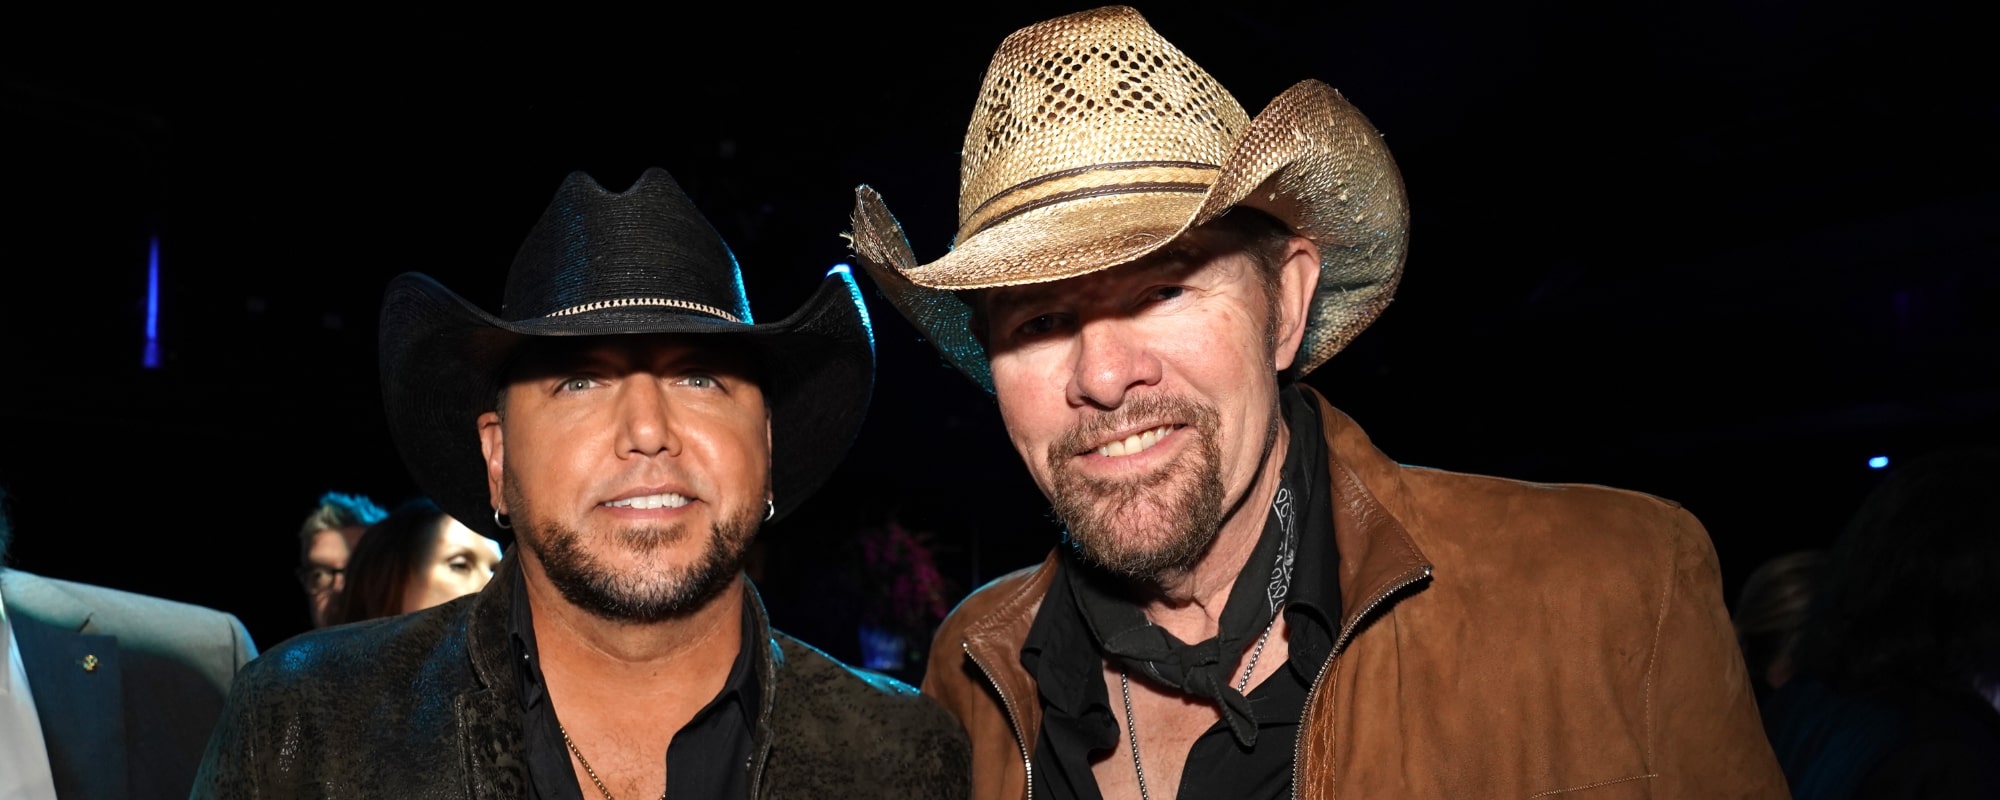 Jason Aldean Takes to Twitter to Mourn the Passing of Fellow Country Star Toby Keith